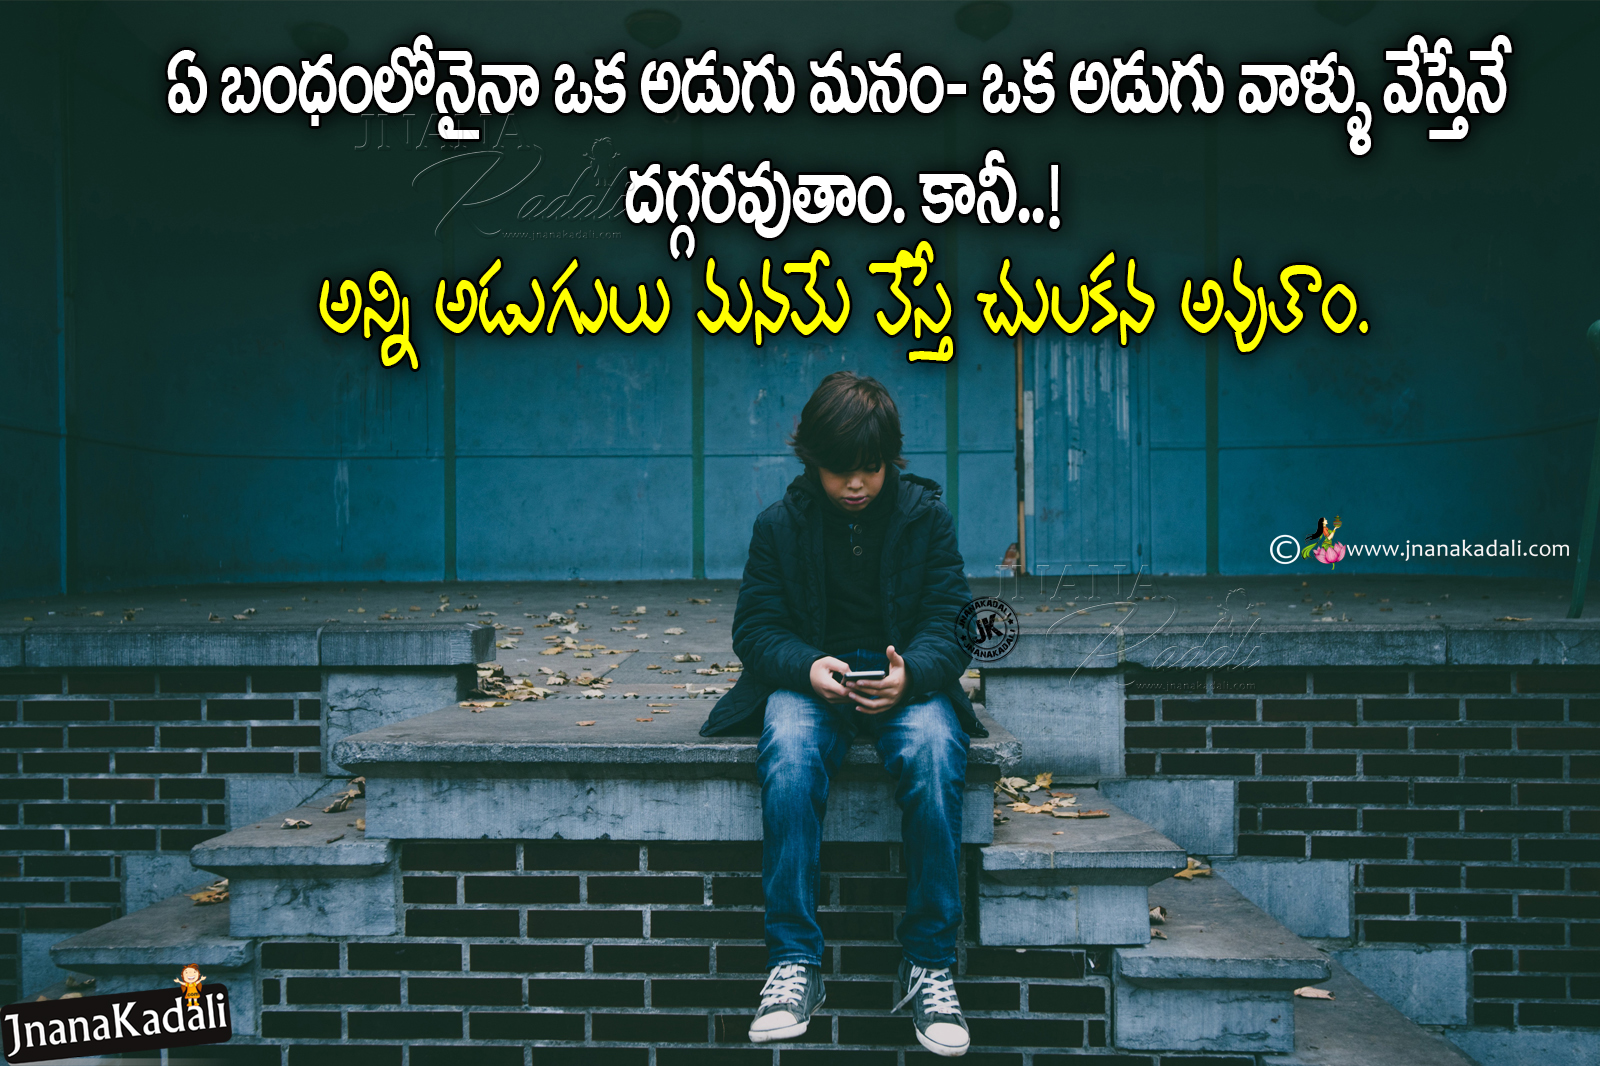 Telugu Quotes On Relationship, Telugu Quotes About - Mobile Phone - HD Wallpaper 